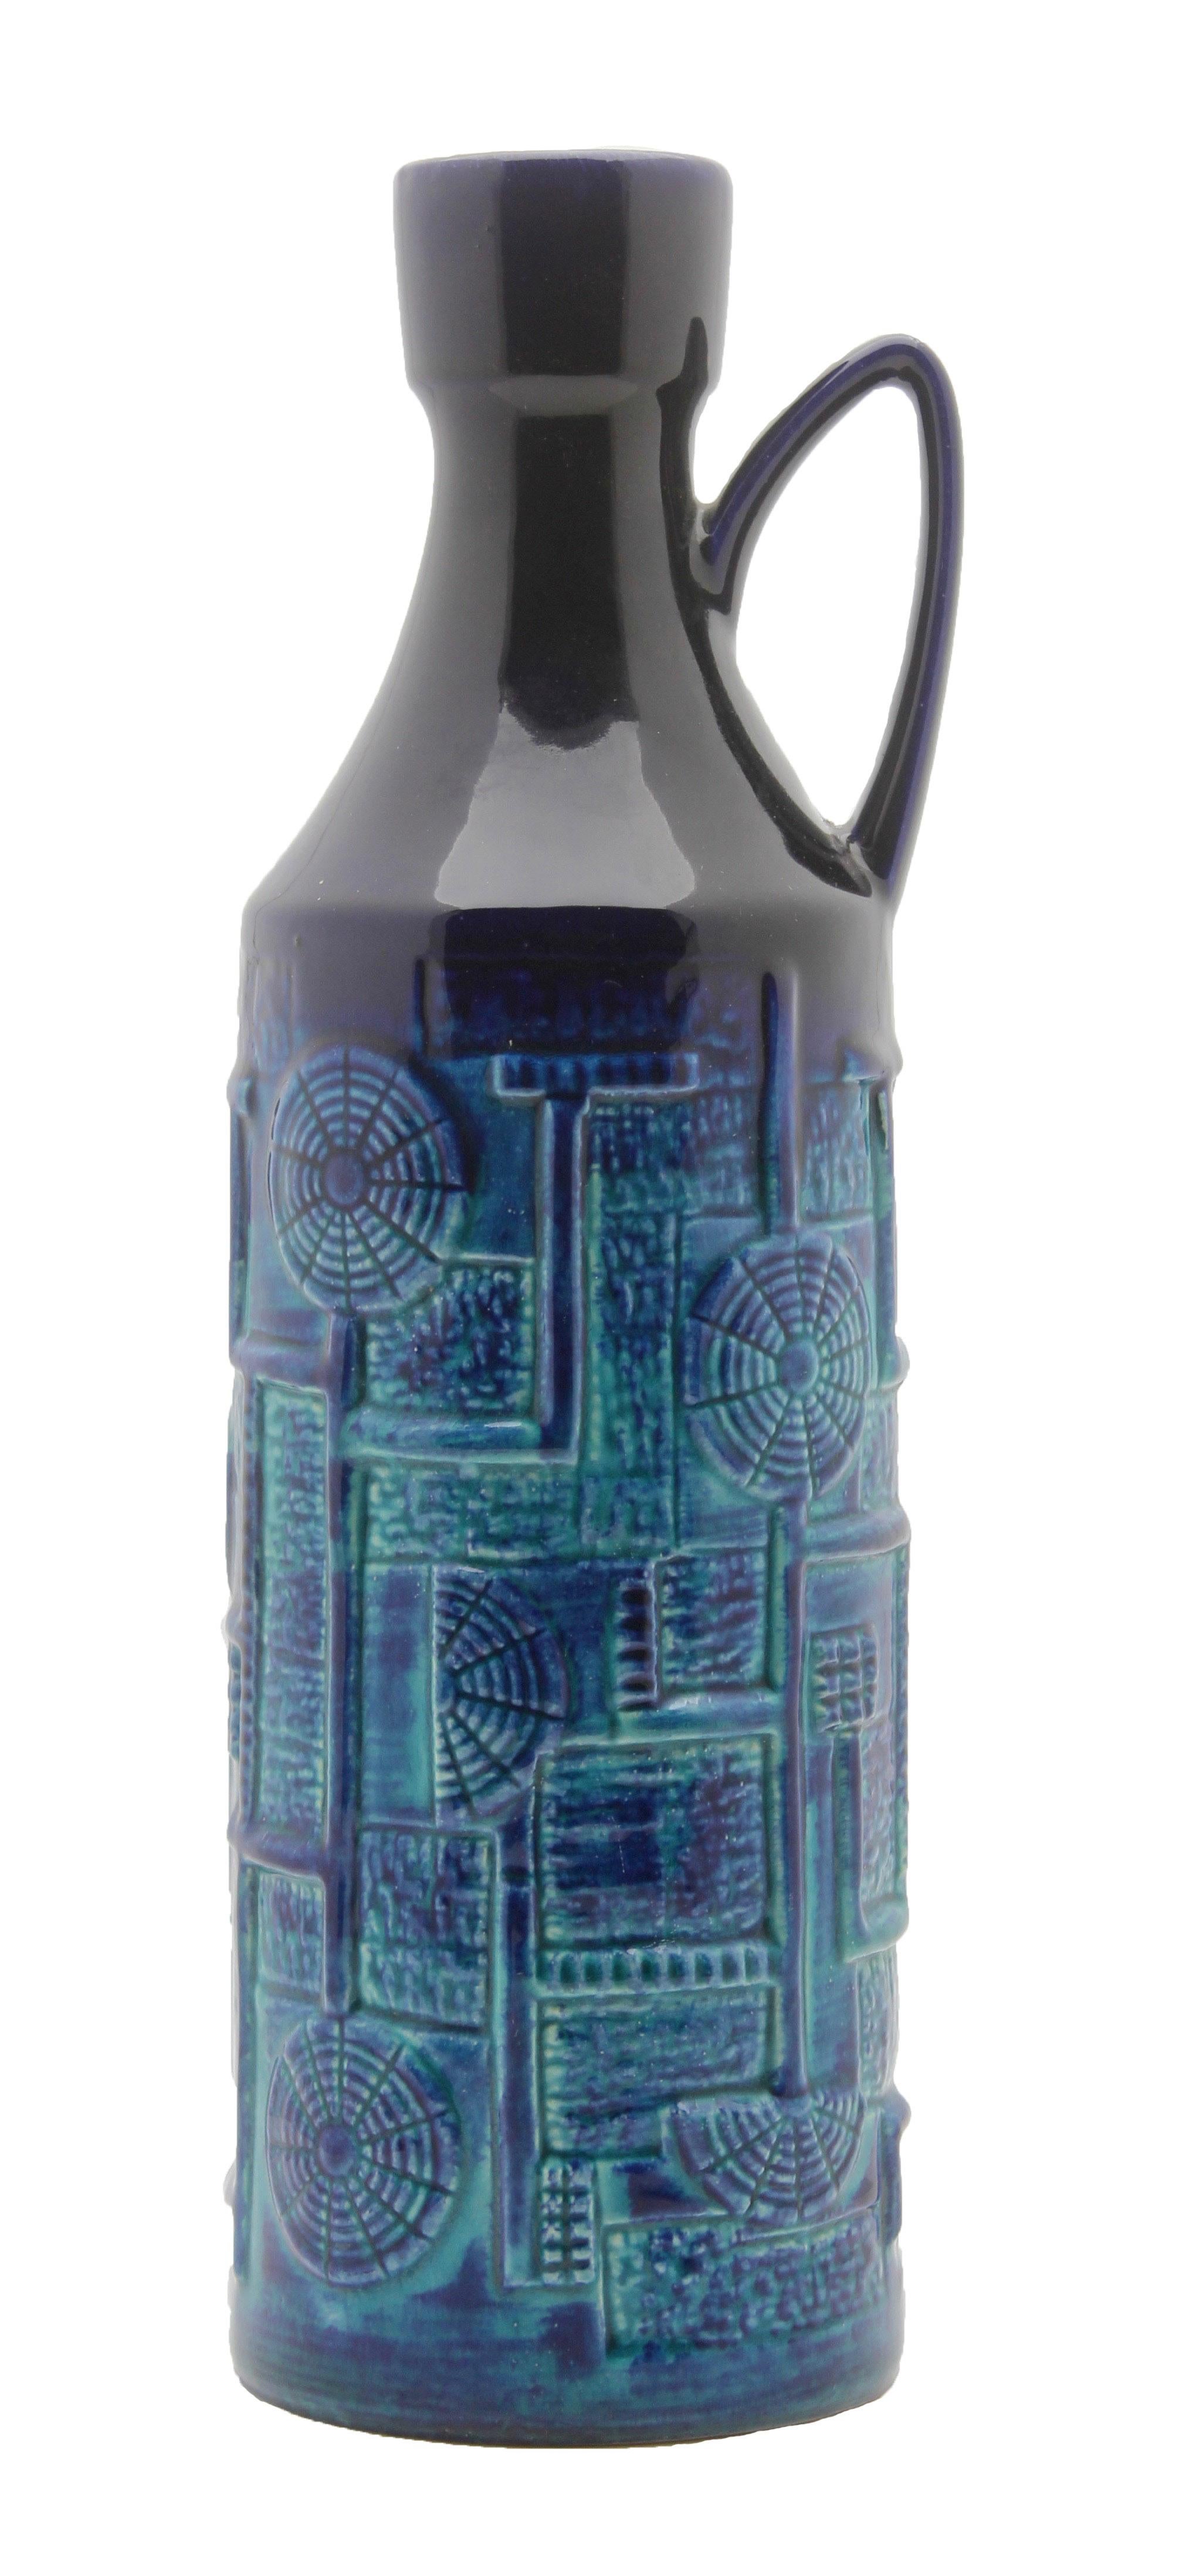 Beautiful bay ceramic pitcher. Dark and light blue glaze over geometrical patterns.
Inspired by the famous Bitossi Rimini.
Created and designed by Bodo Mans.
Bottom marks say: BAY W.-GERMANY 257-35 / 260-20
Excellent condition. No